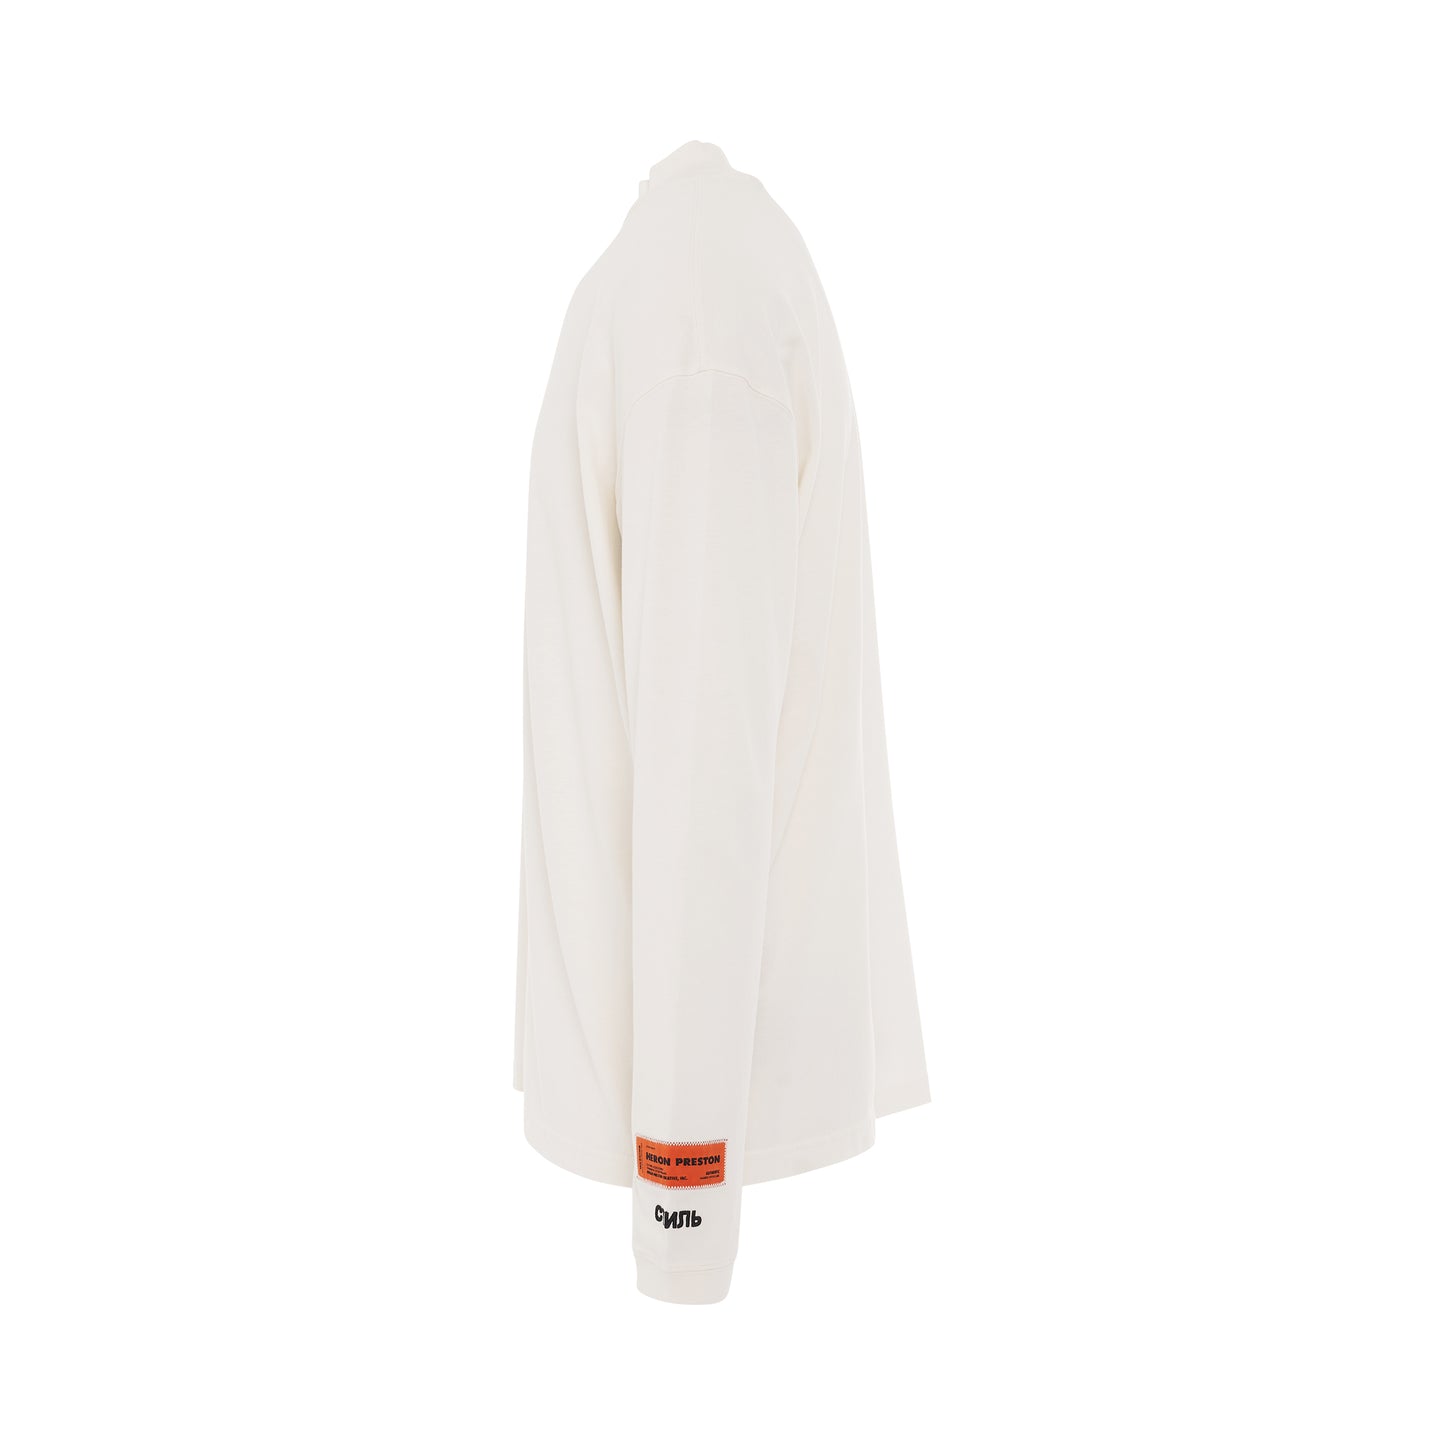 CTNMB Long Sleeve Turtleneck in White